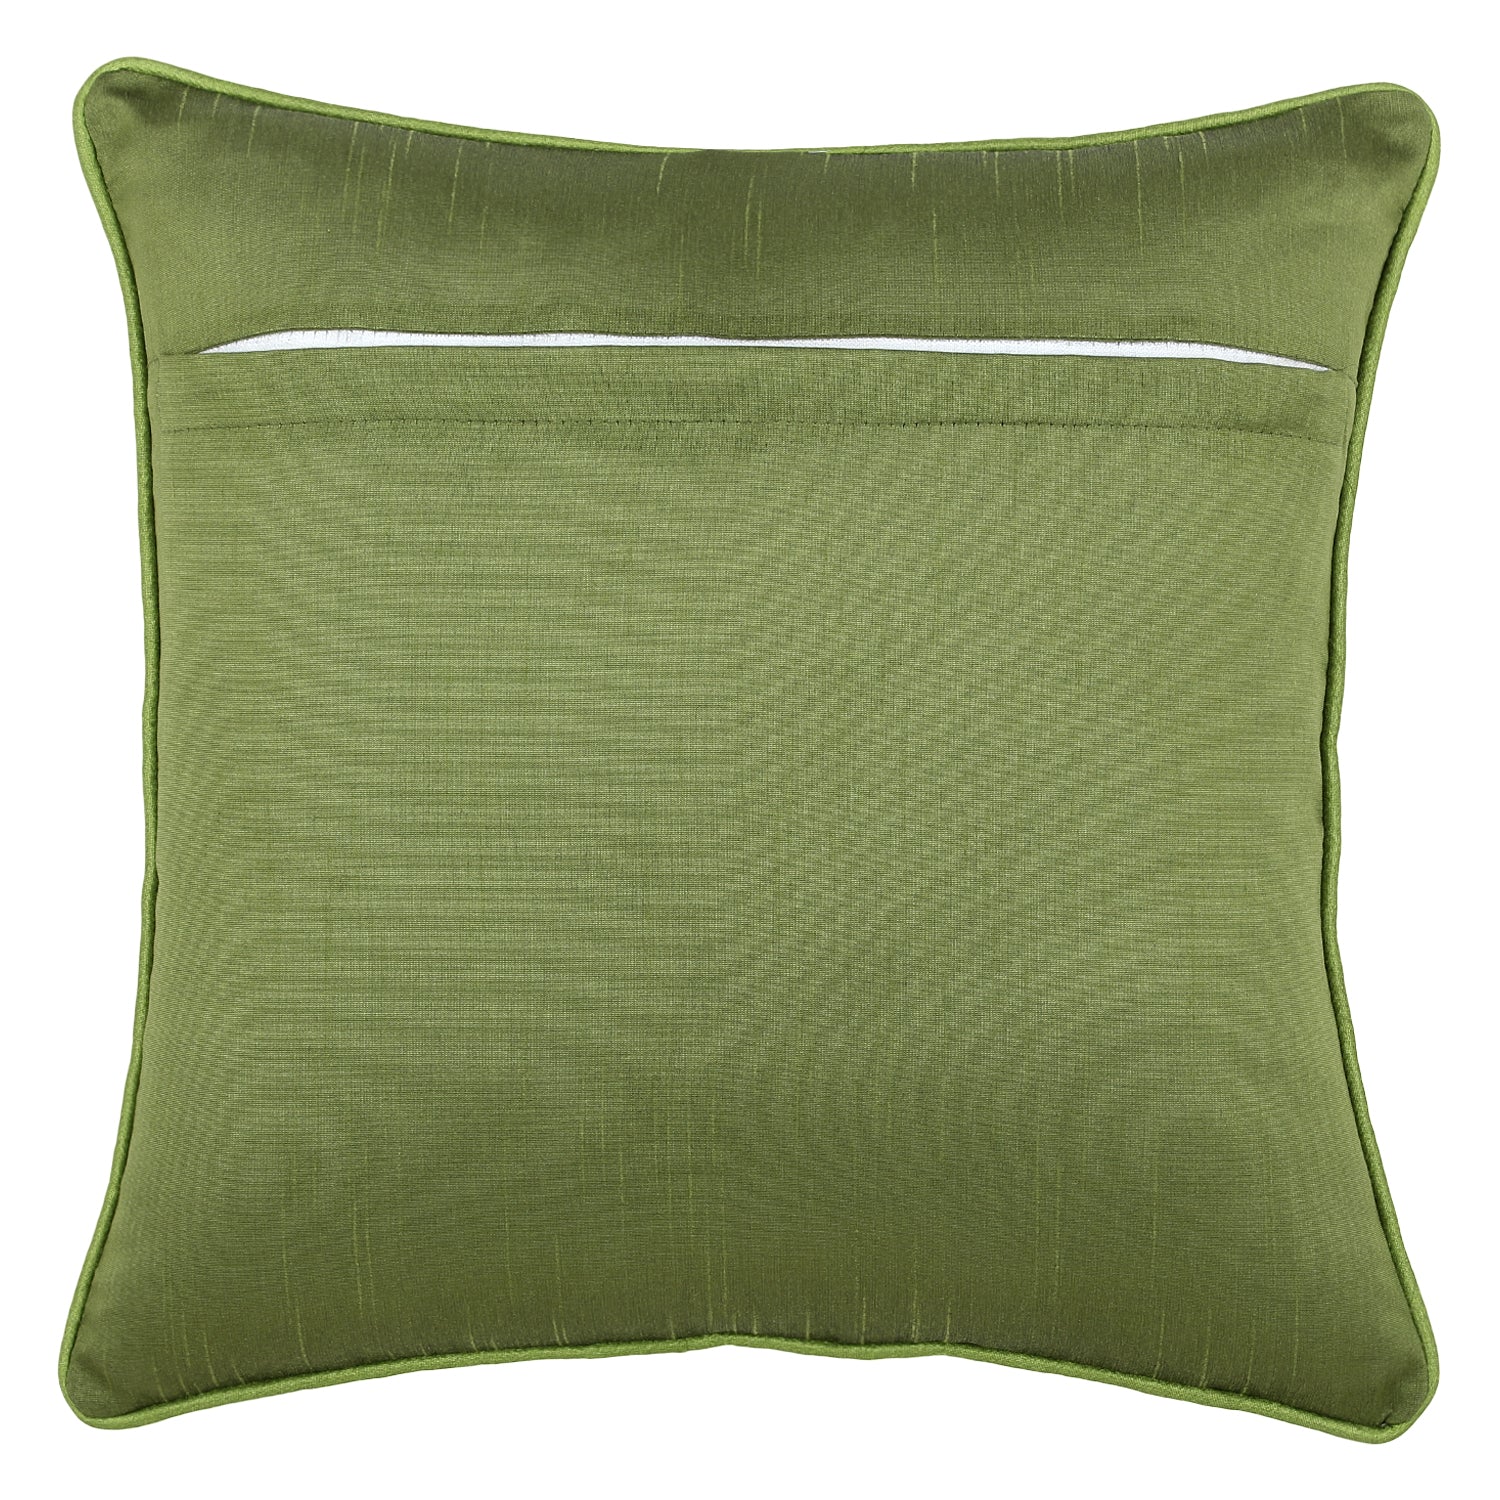 Desi Kapda Embroidered Cushions Cover (Pack of 5, 40 cm*40 cm, Green)